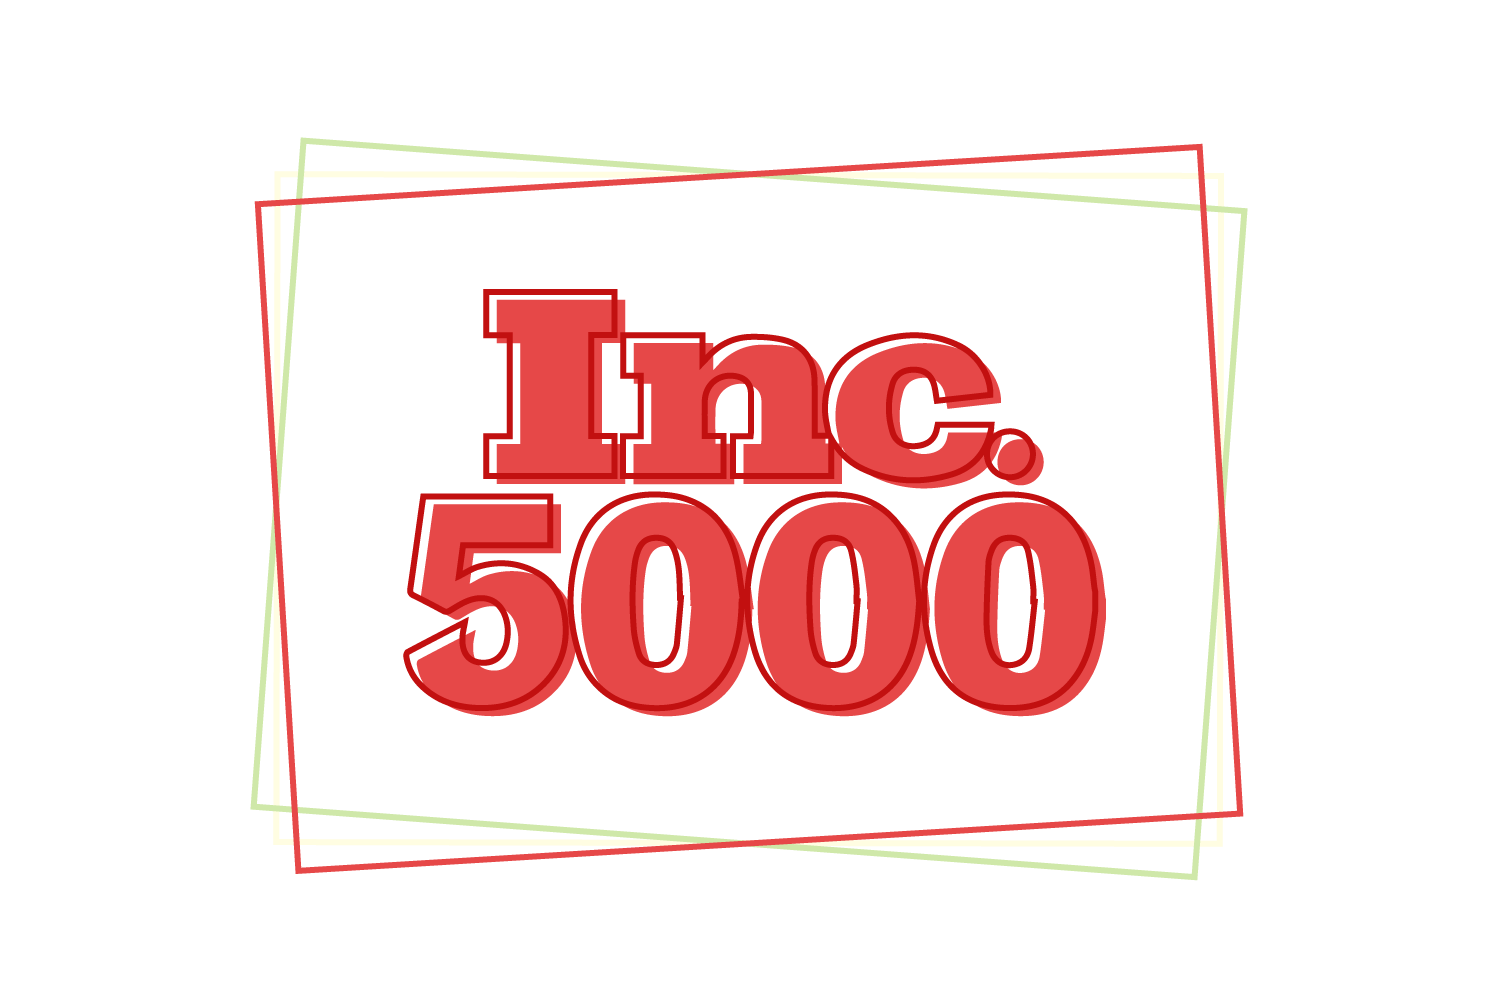 COLAB Ranks on the 2022 Inc. 5000 Annual List for the 4th Time